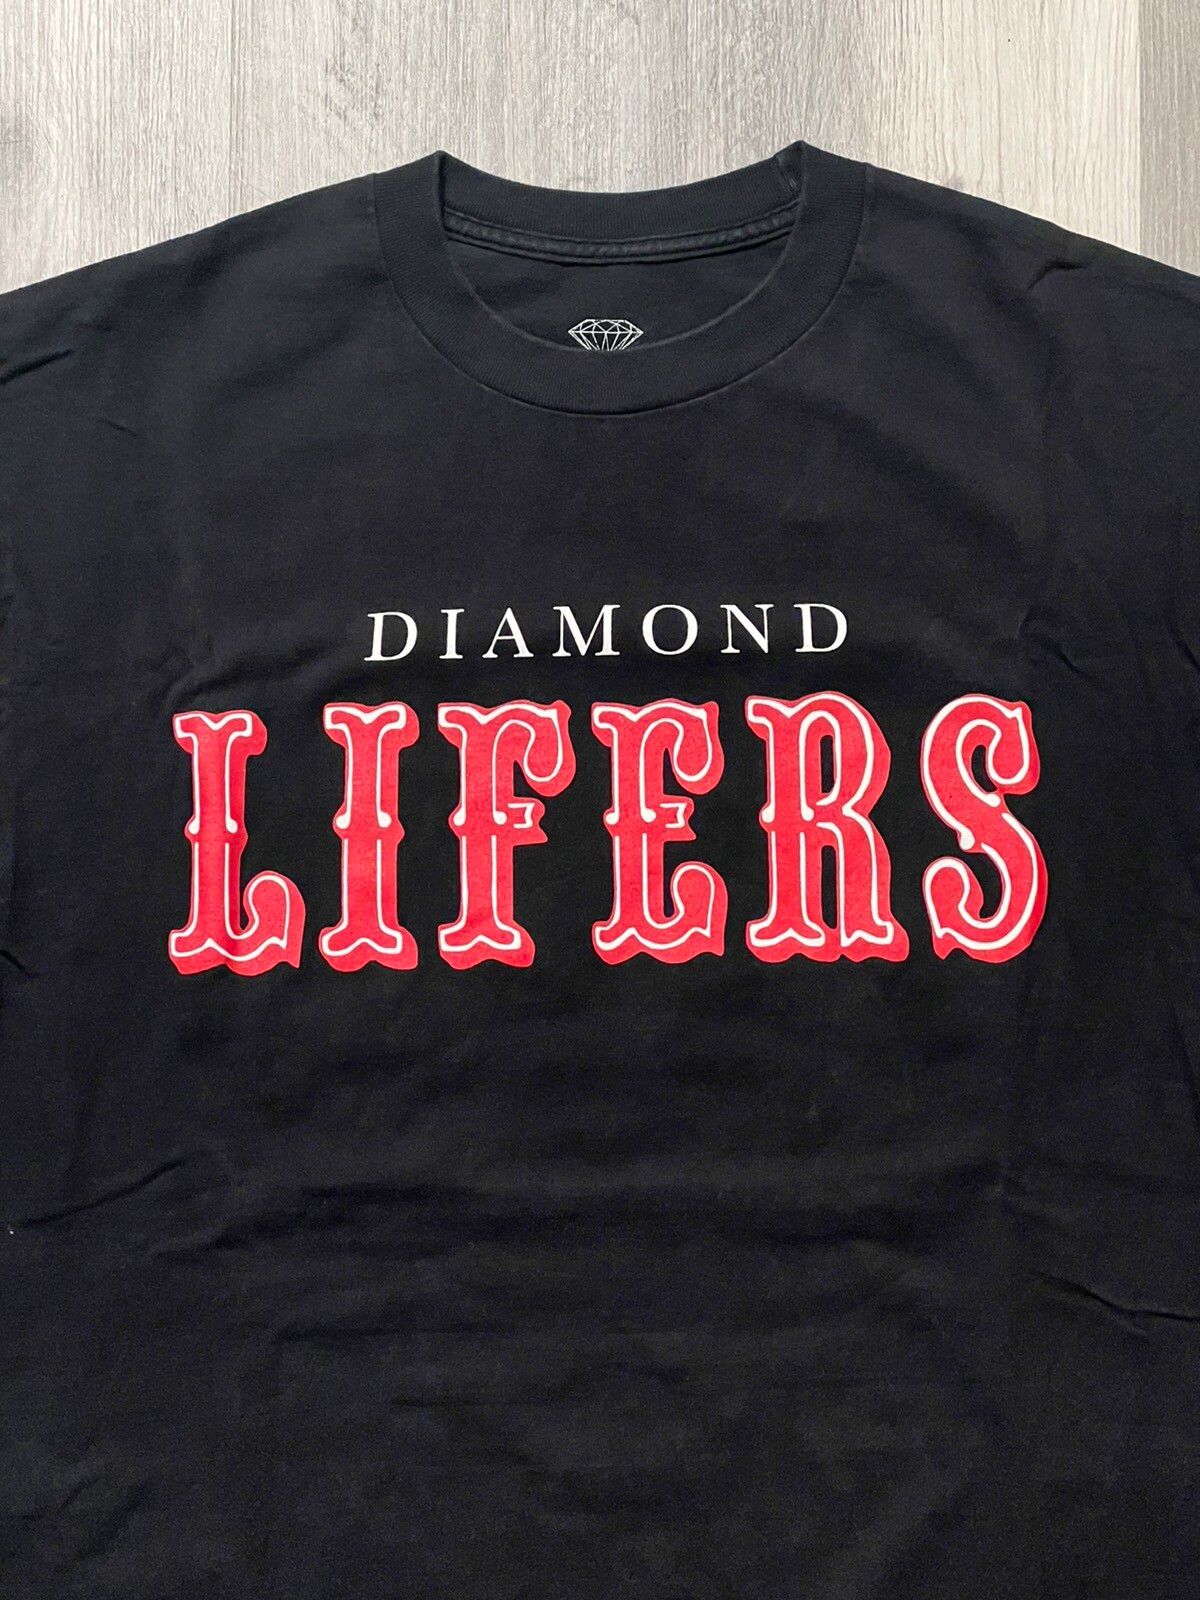 Diamond Supply Co Diamond Supply Co. x Curren$y Jet Life Shirt - Size Large Size US L / EU 52-54 / 3 - 2 Preview